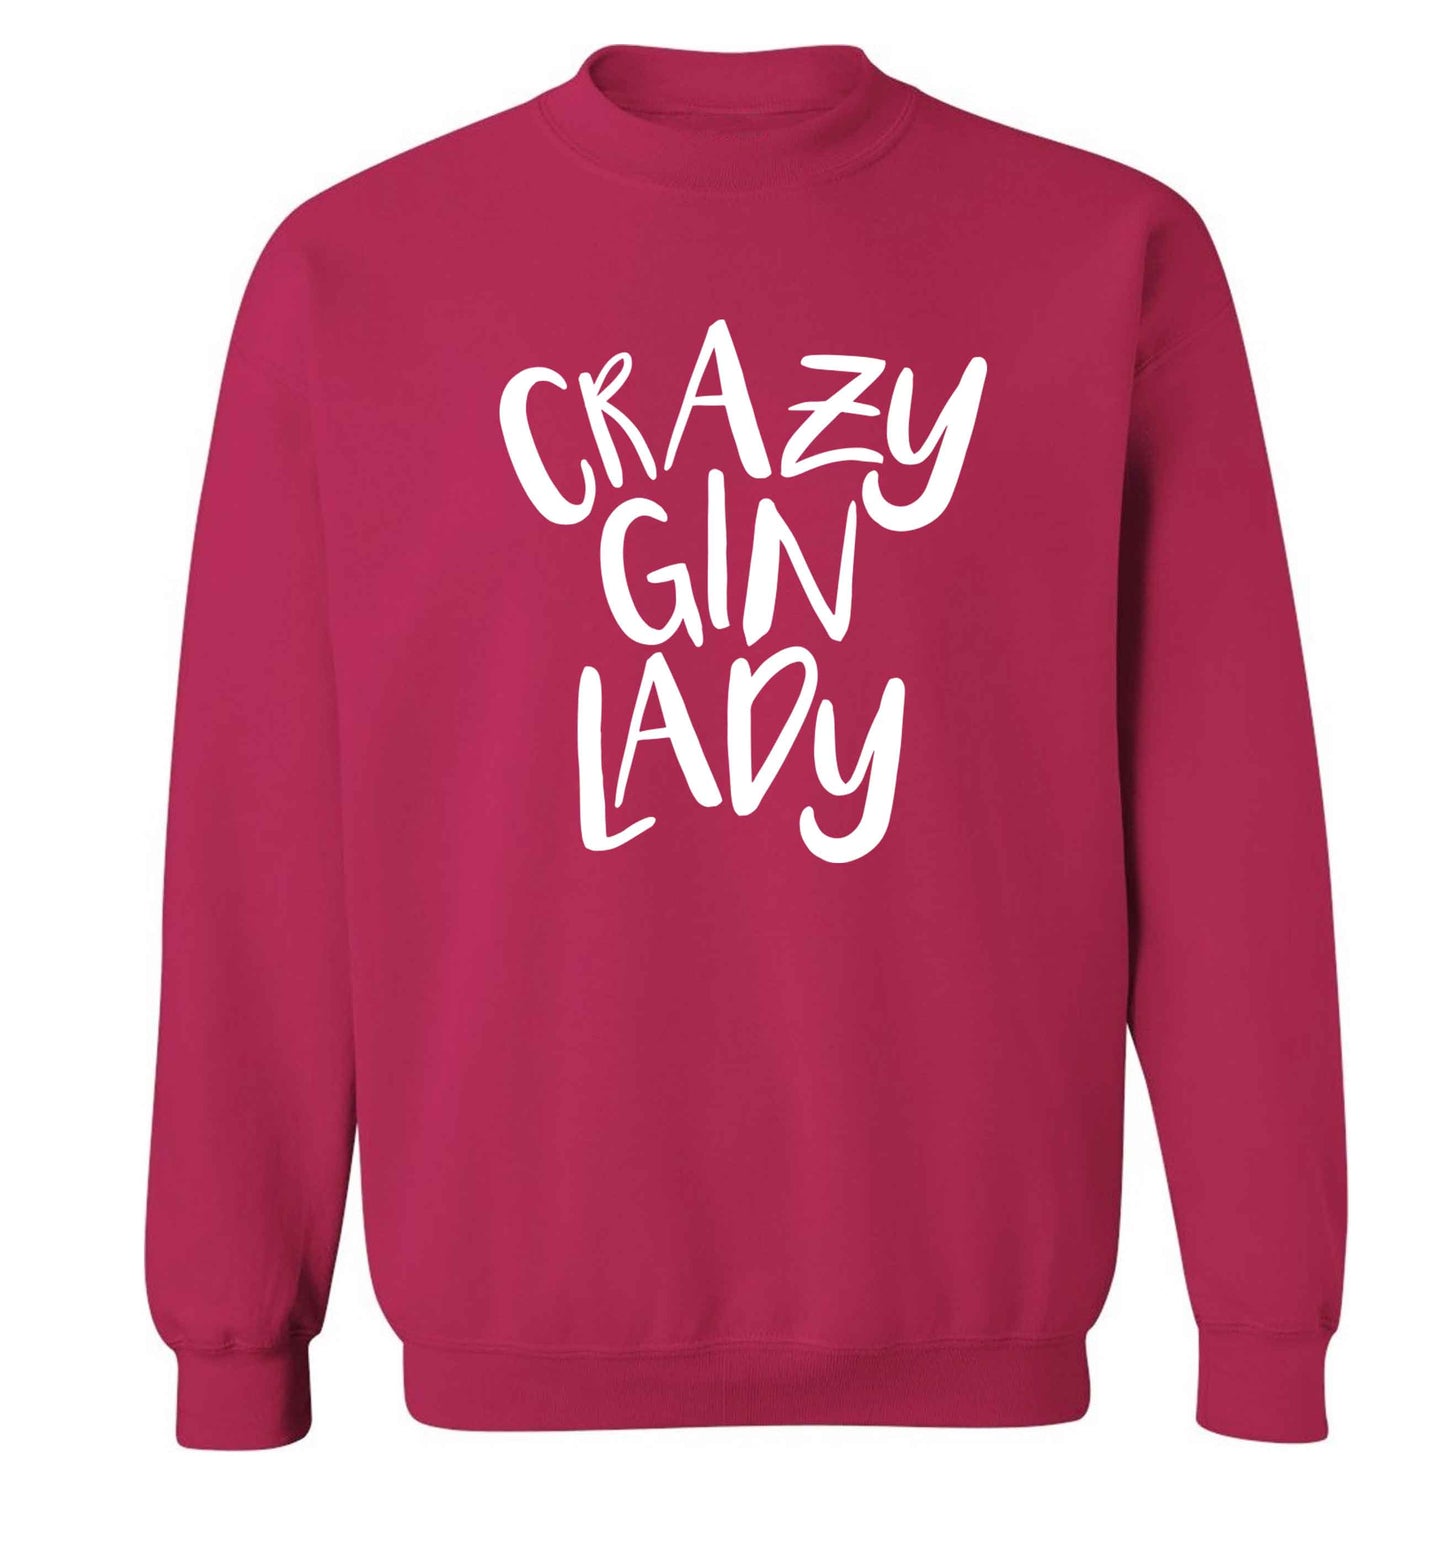 Crazy gin lady Adult's unisex pink Sweater 2XL